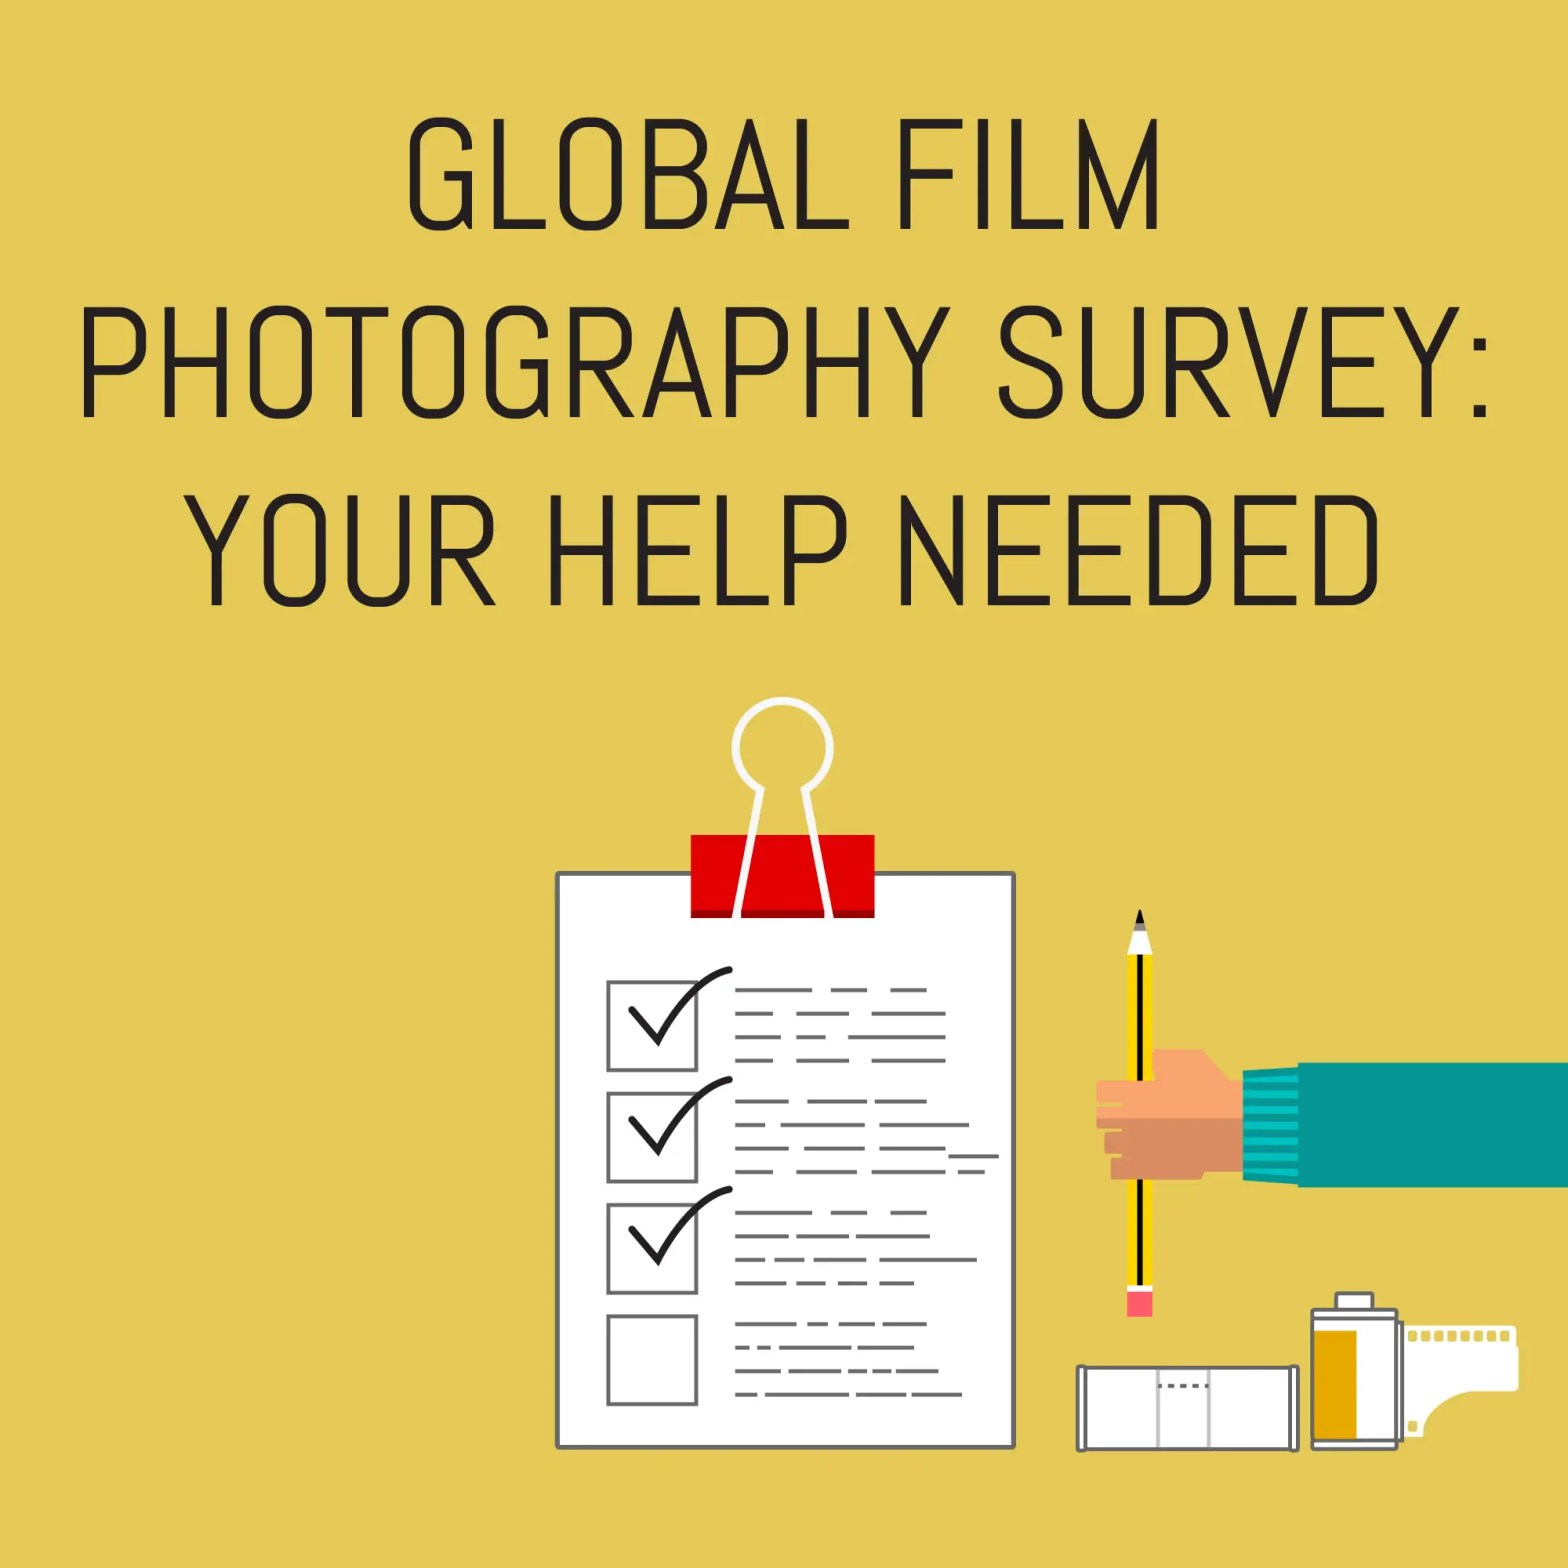 Global film photography survey: Your help needed